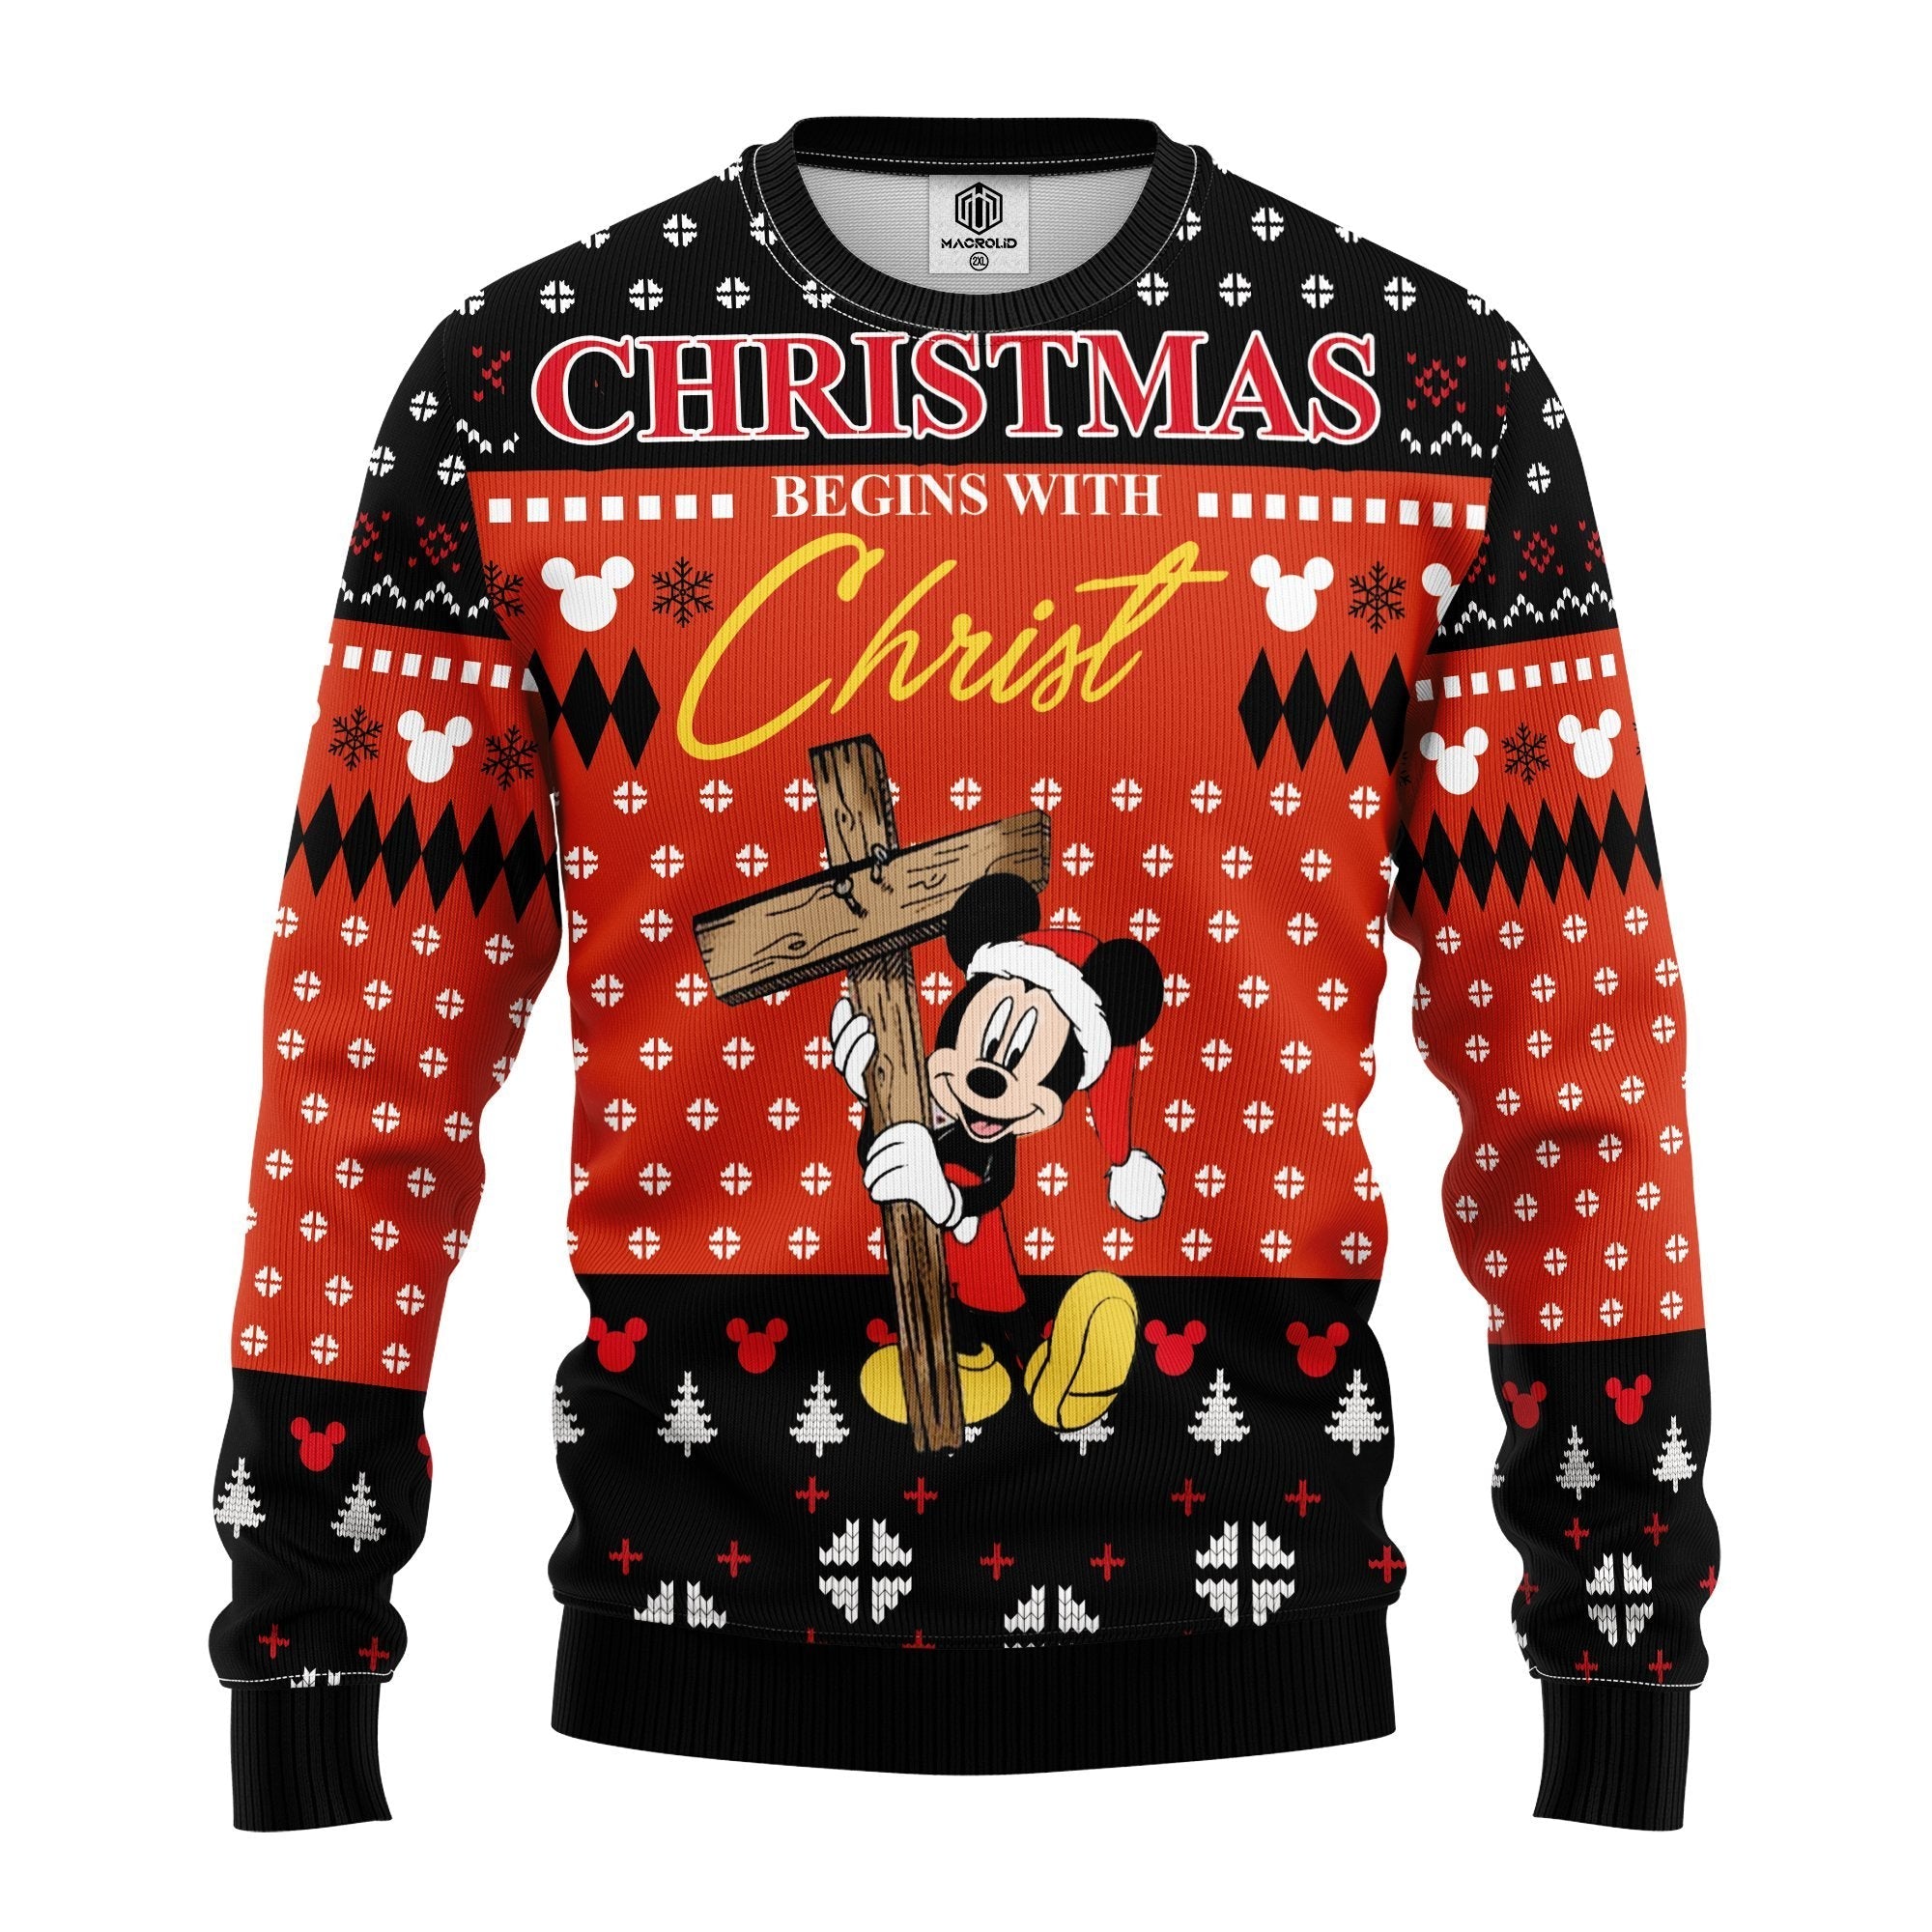 Disney Sweater Christmas Begins With Christ MK Mouse Black Red Ugly Sweater Cute Disney MK Mouse Ugly Sweater 1849